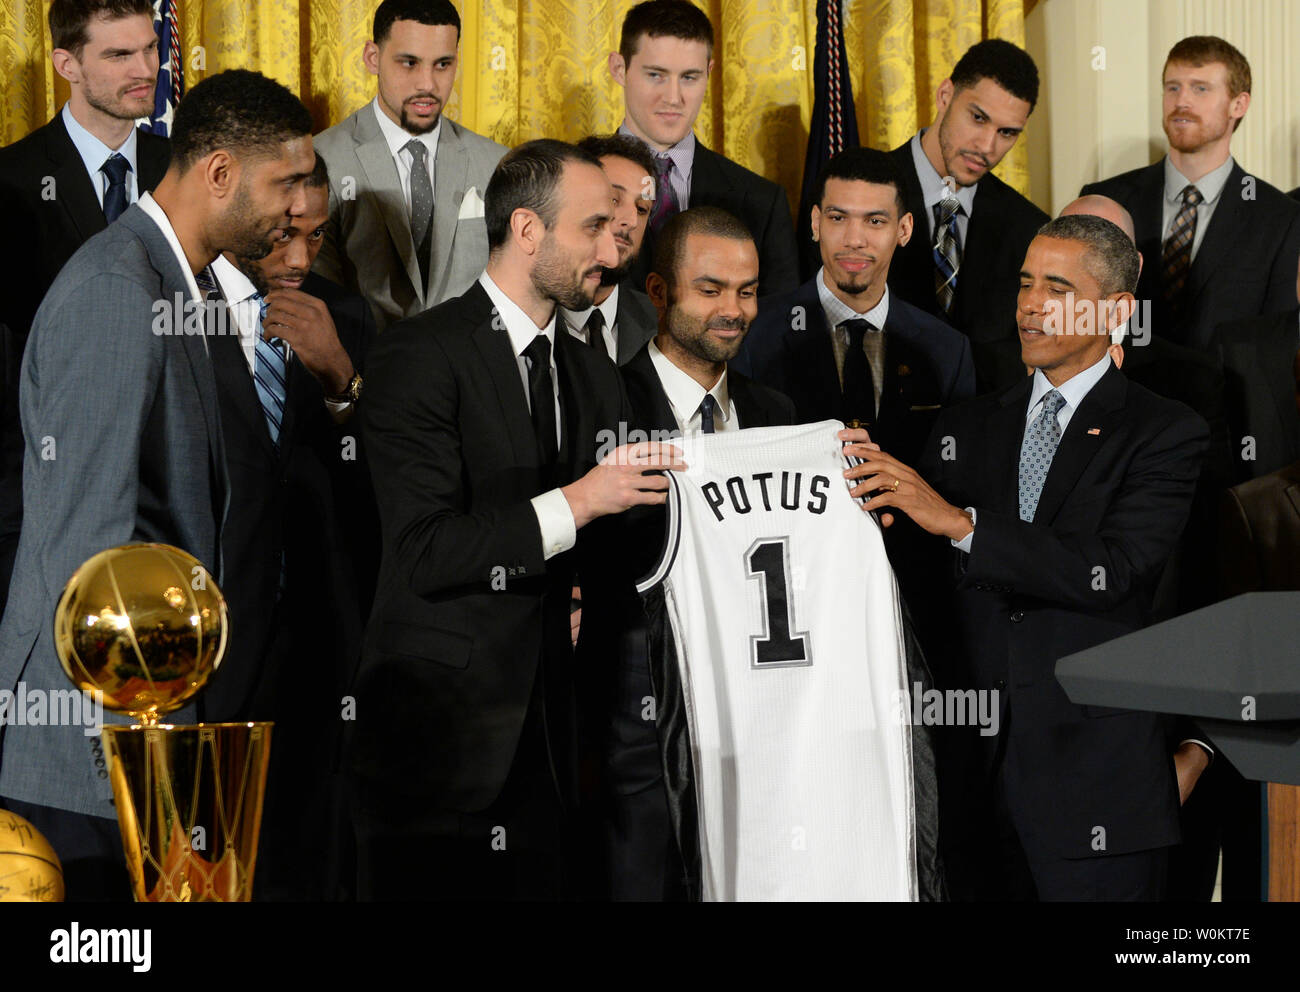 Tim Duncan refuses to wear a tie during San Antonio Spurs White House visit